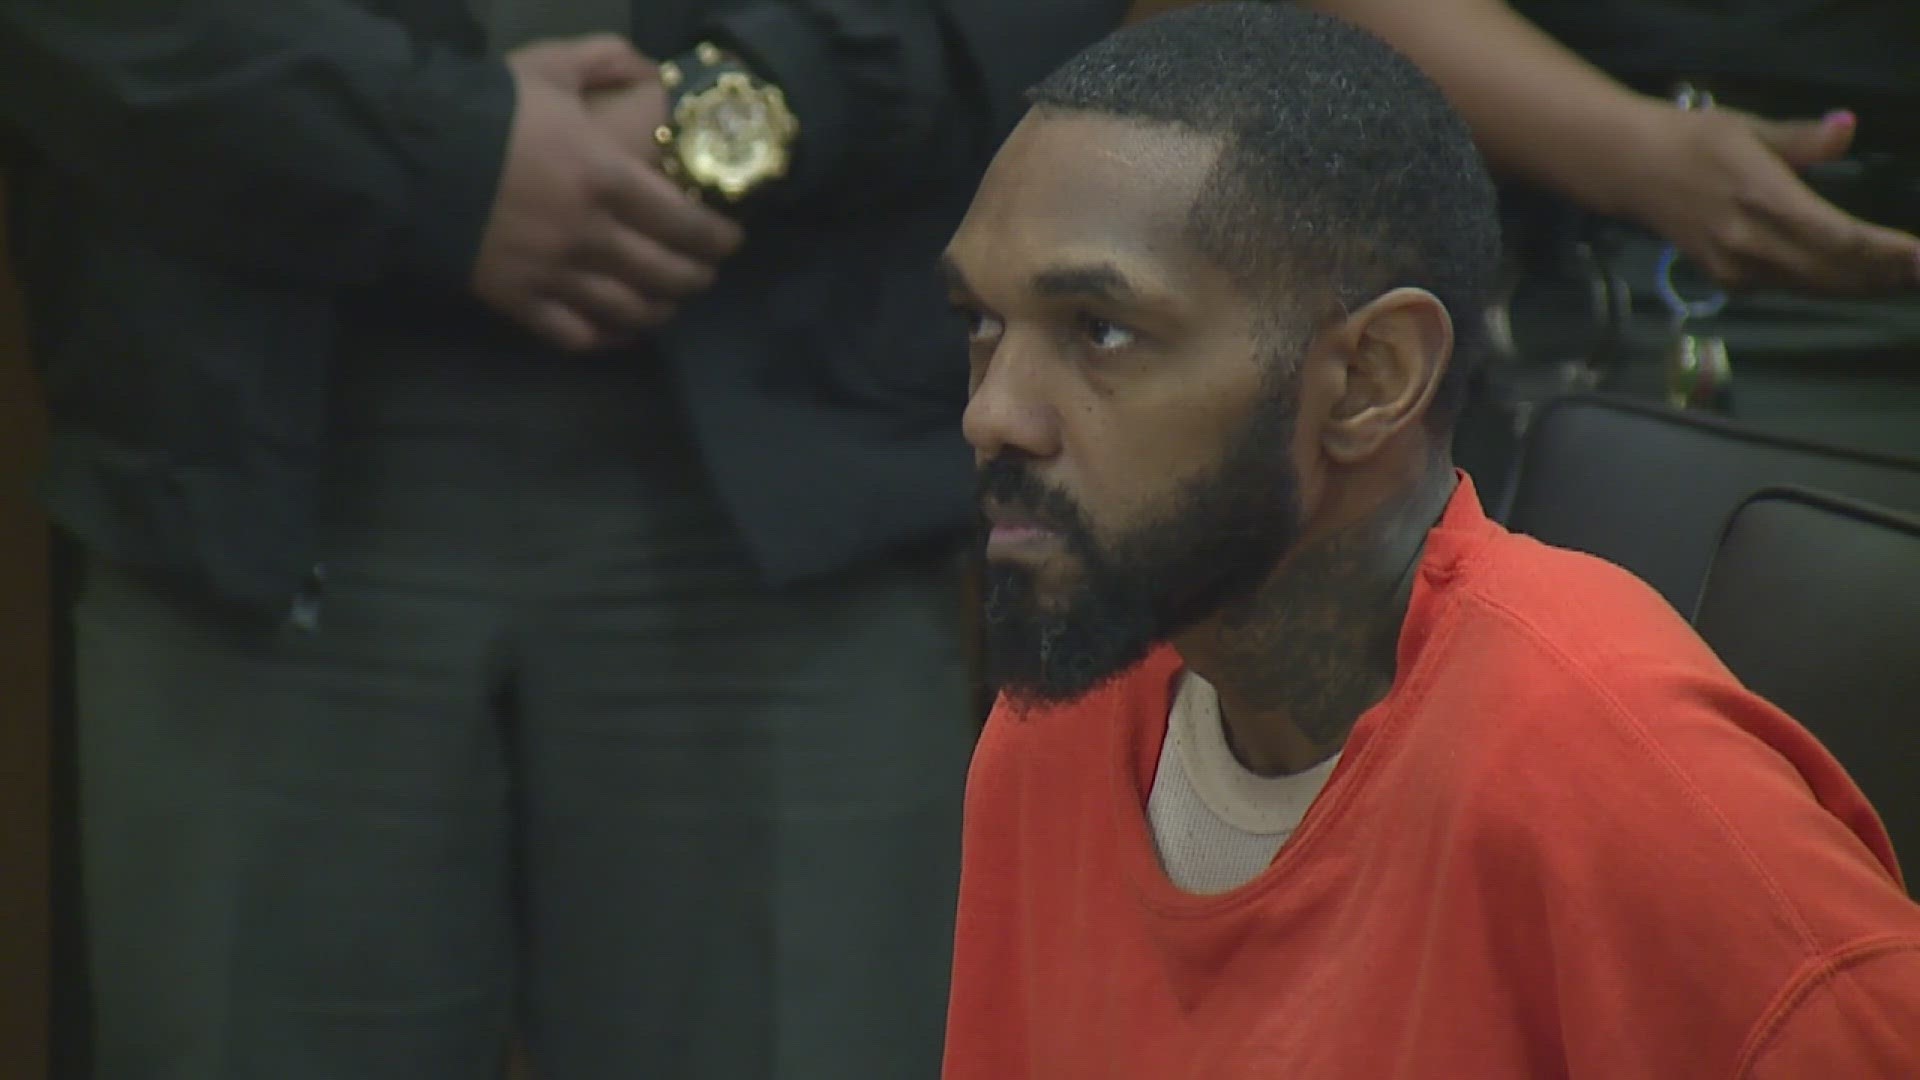 Edwards was found guilty on two counts of murder, two counts of felonious assault and one count of domestic violence for the deadly October shooting on Sunset Drive.